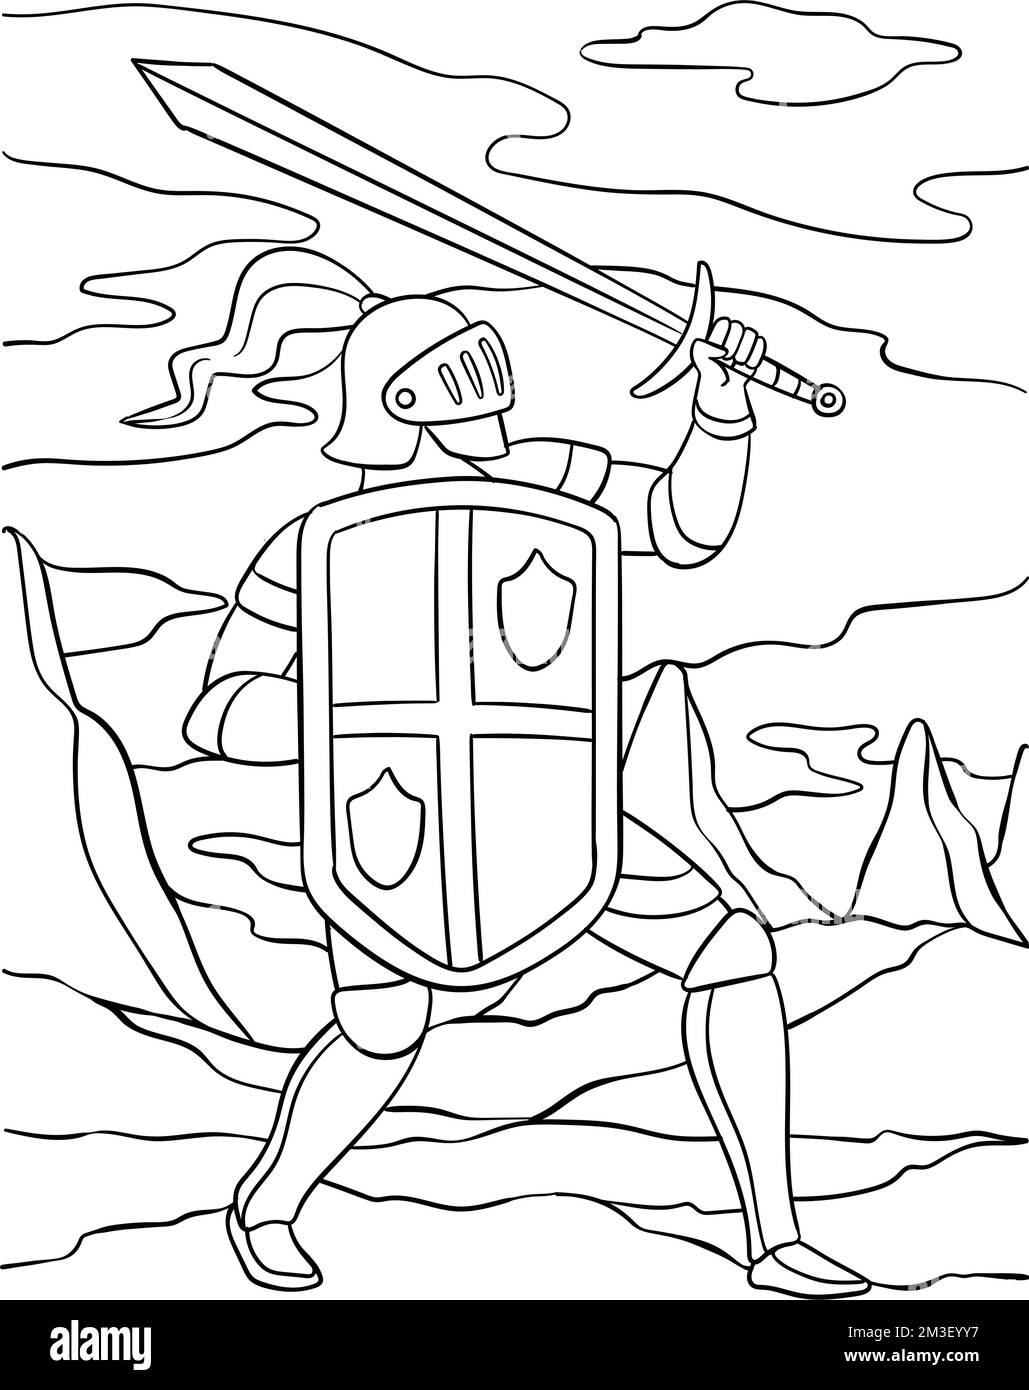 Knight Attacking Pose Coloring Page for Kids Stock Vector